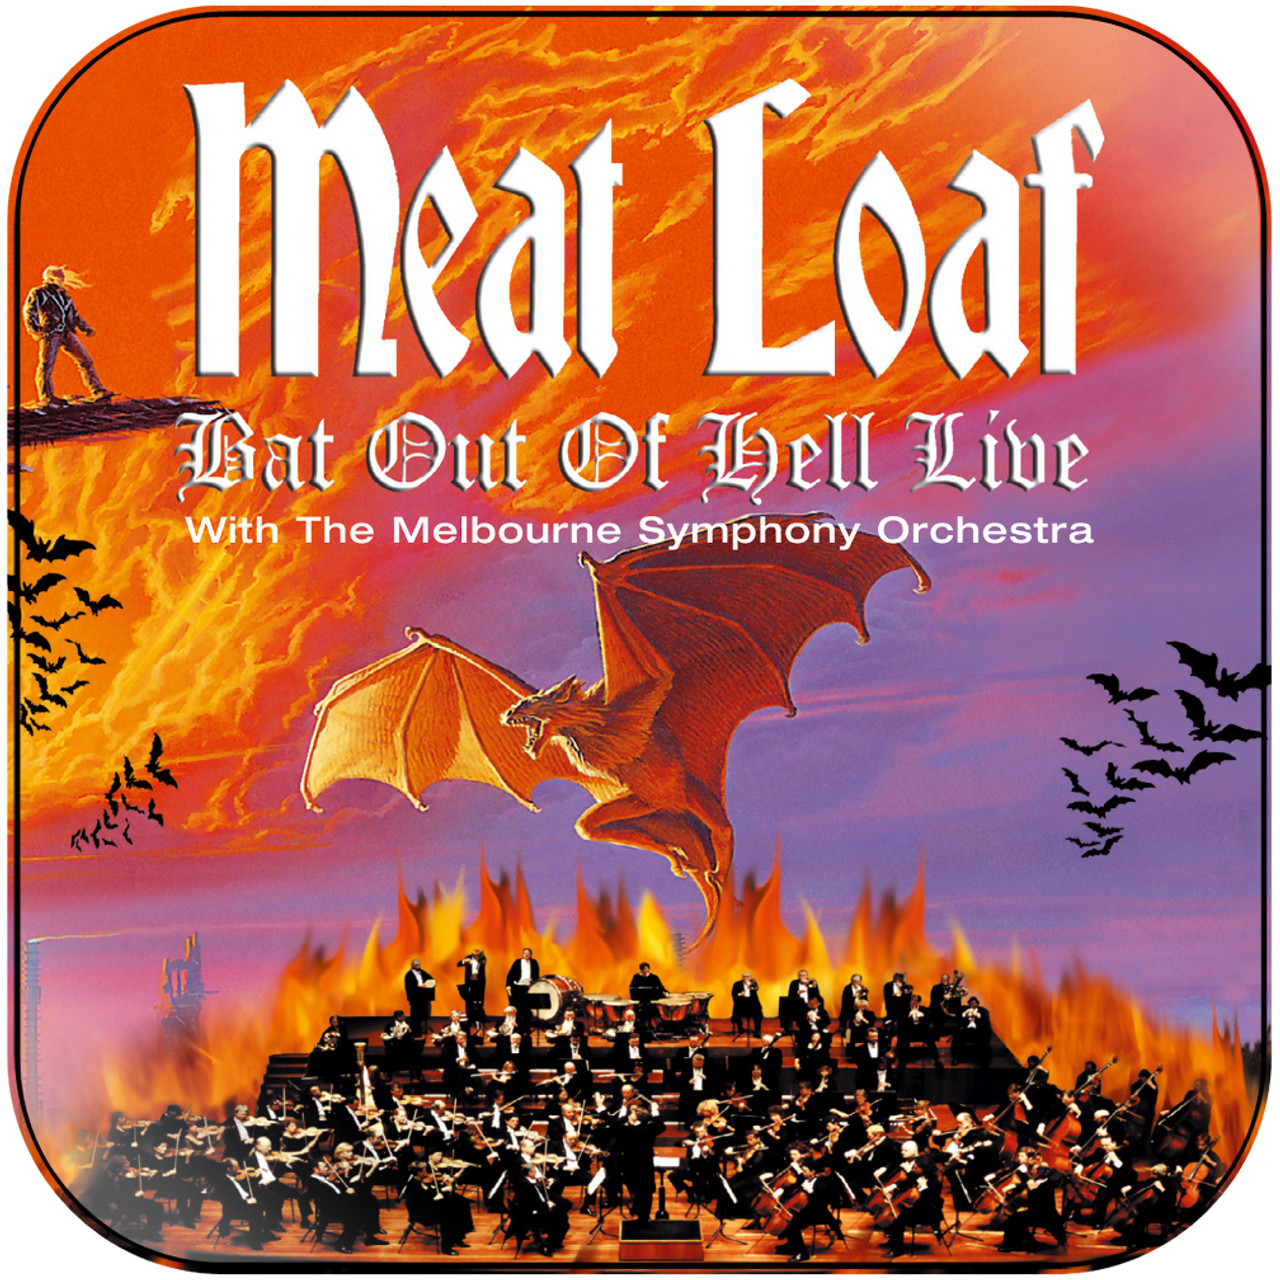 Meat Loaf Bat Out Of Hell Album Cover Sticker